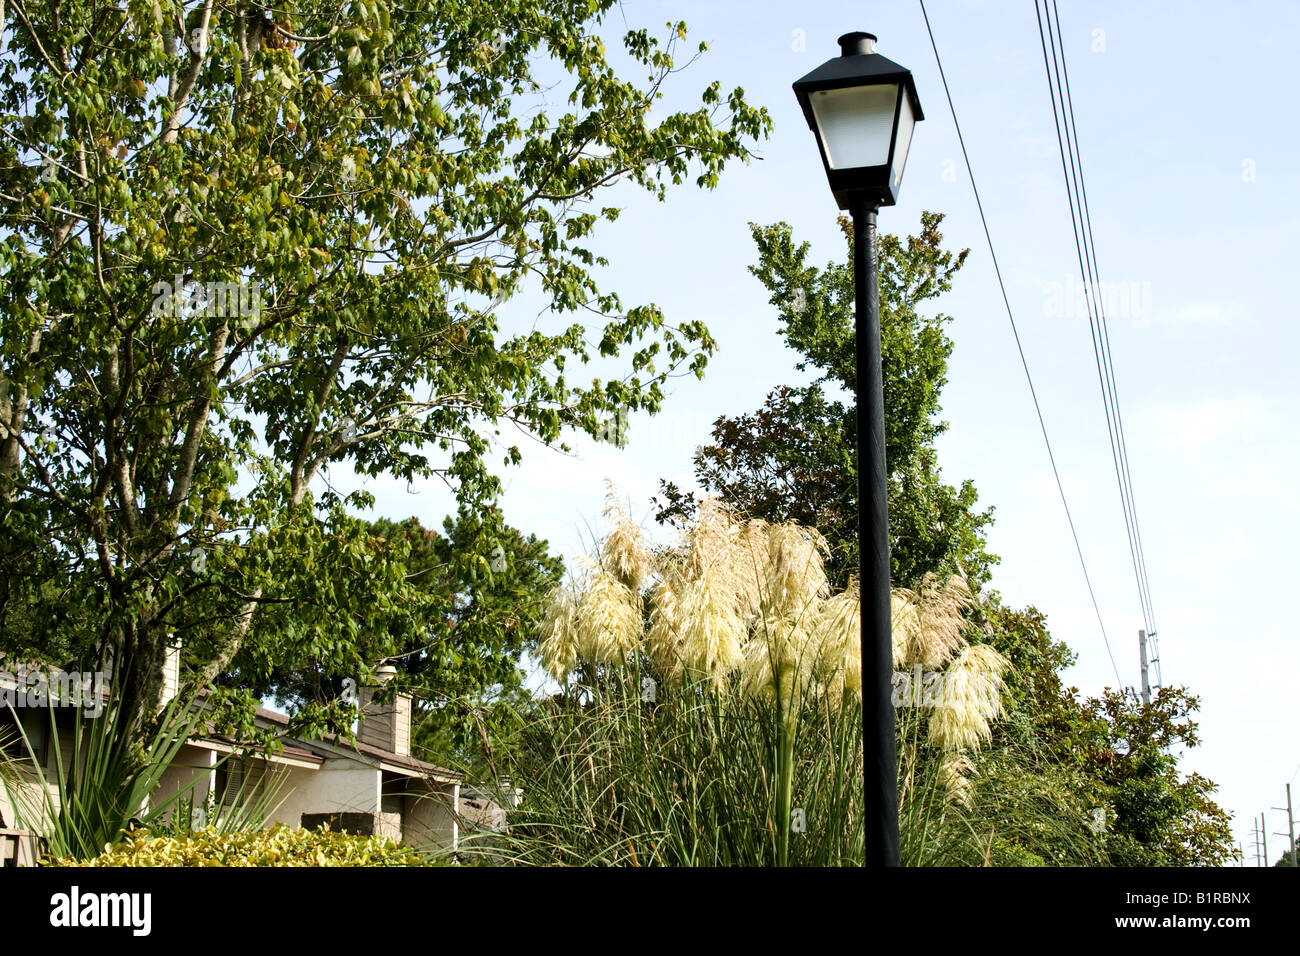 A street lamp under power lines with Pampas grass behind it in Ponte Vedra Beach, Florida Stock Photo